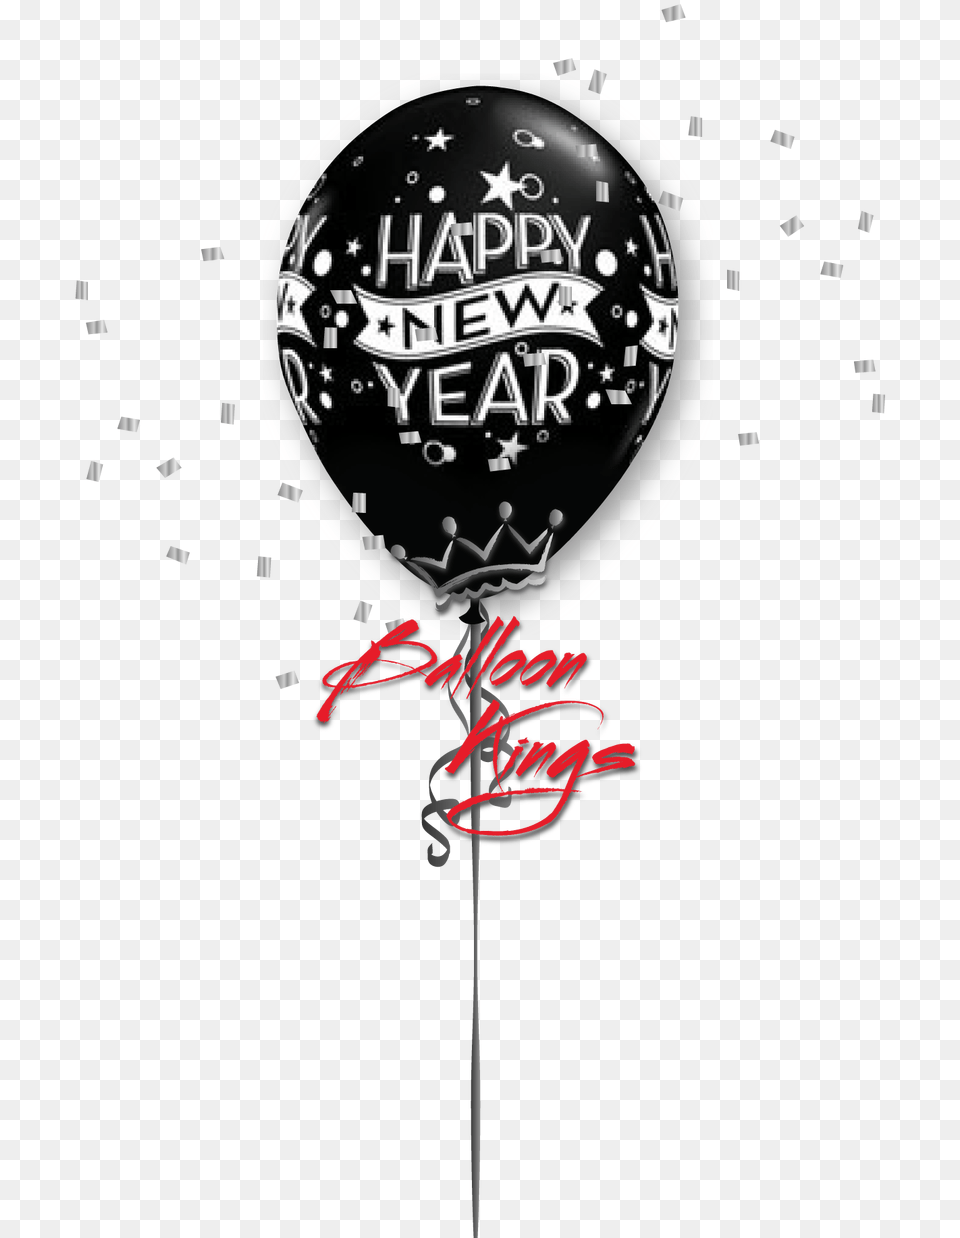 Latex New Year Confetti Full Hd Background Images For Picsart, Balloon, Glass Free Png Download